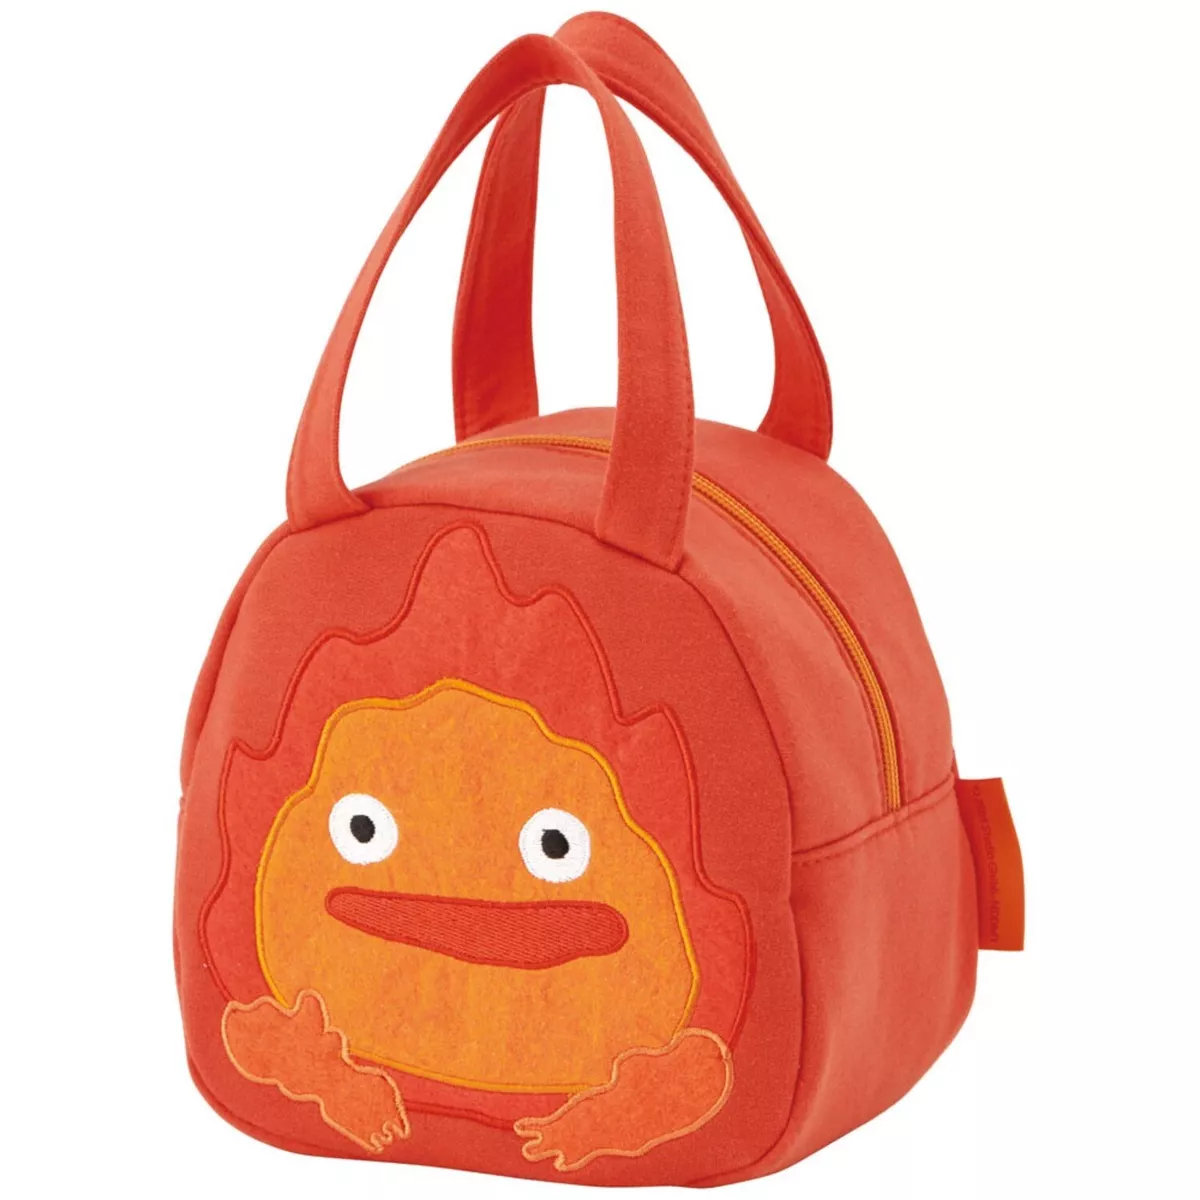 Howl's Moving Castle Calcifer in A Hurry Embroidery Canvas Tote Bag - Howls Moving Castle